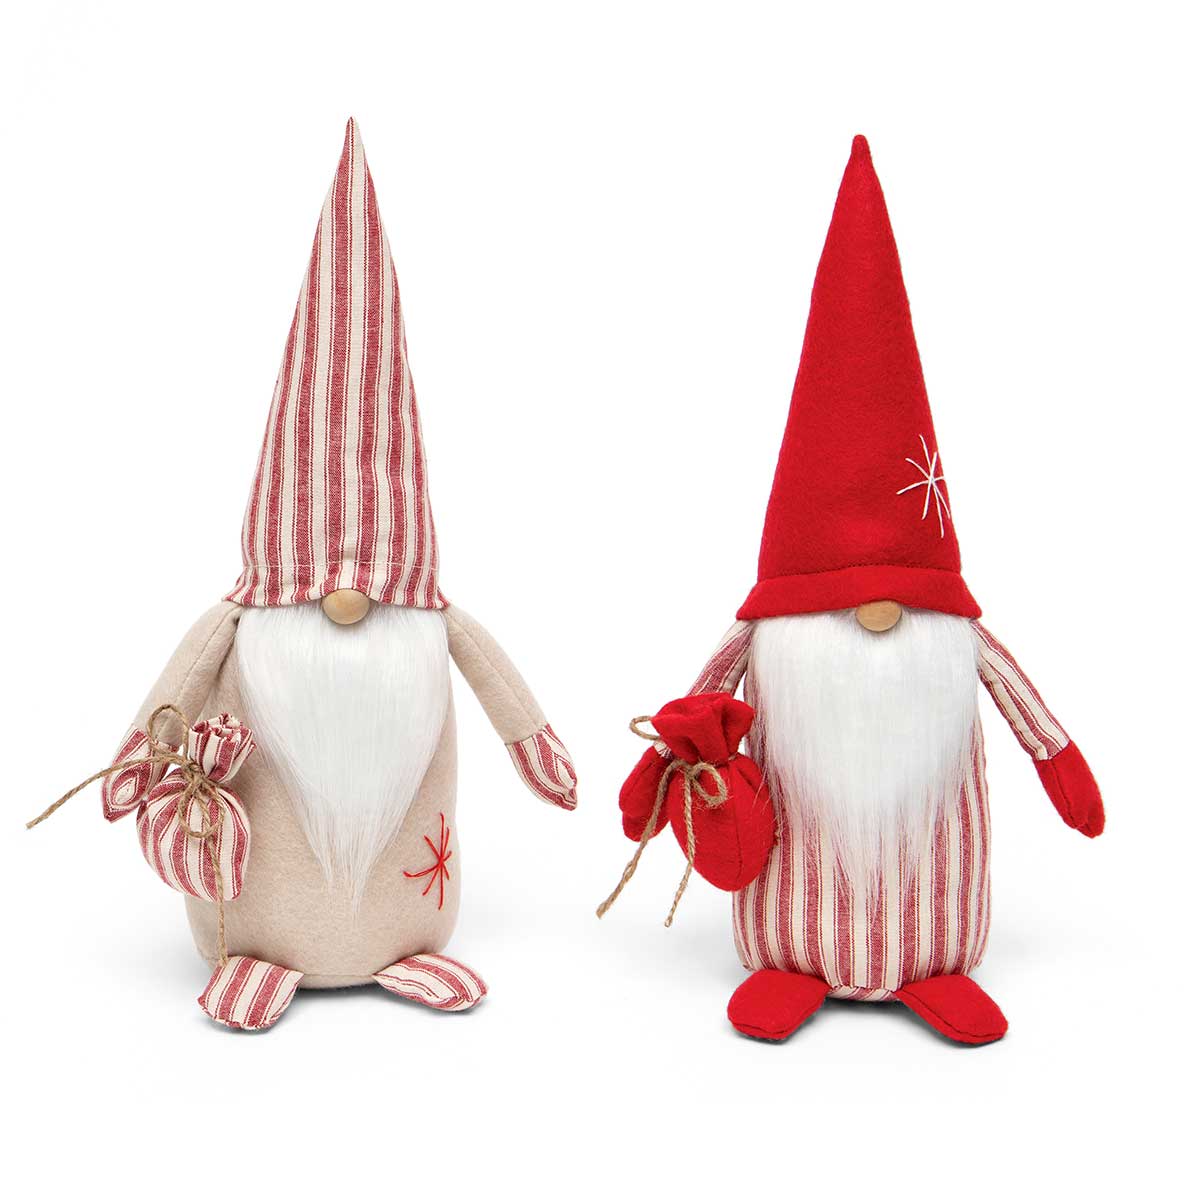 b70 GNOME TICKING BAG 2ASSORTE 5IN X 4.5IN X 12.5IN POLYESTER